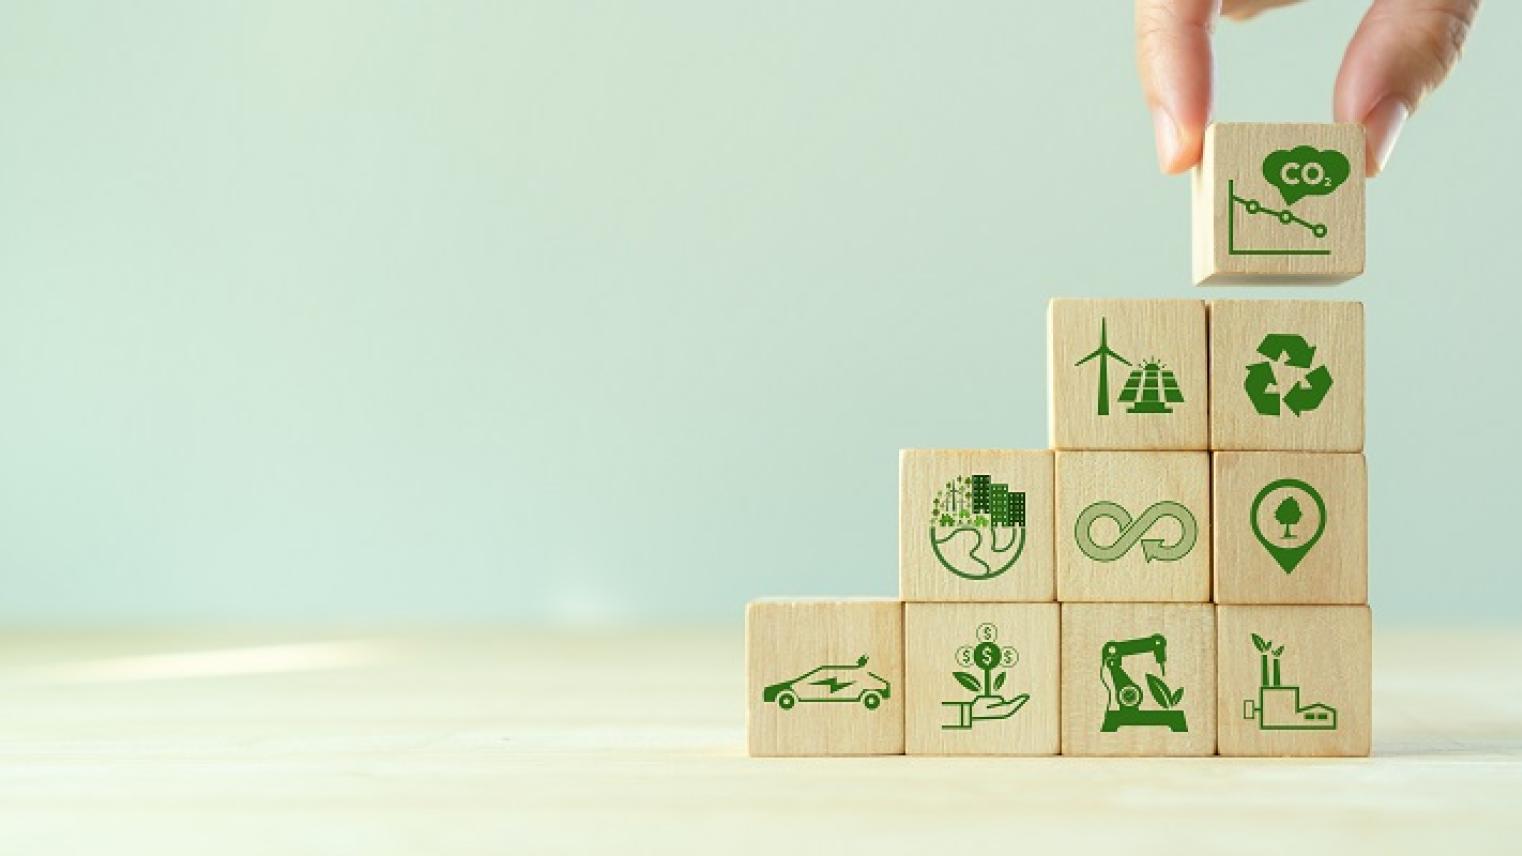 Image of hand stacking cubes with decarbonisation icons by Parradee, from Adobe Stock images, used under Educational Licence 